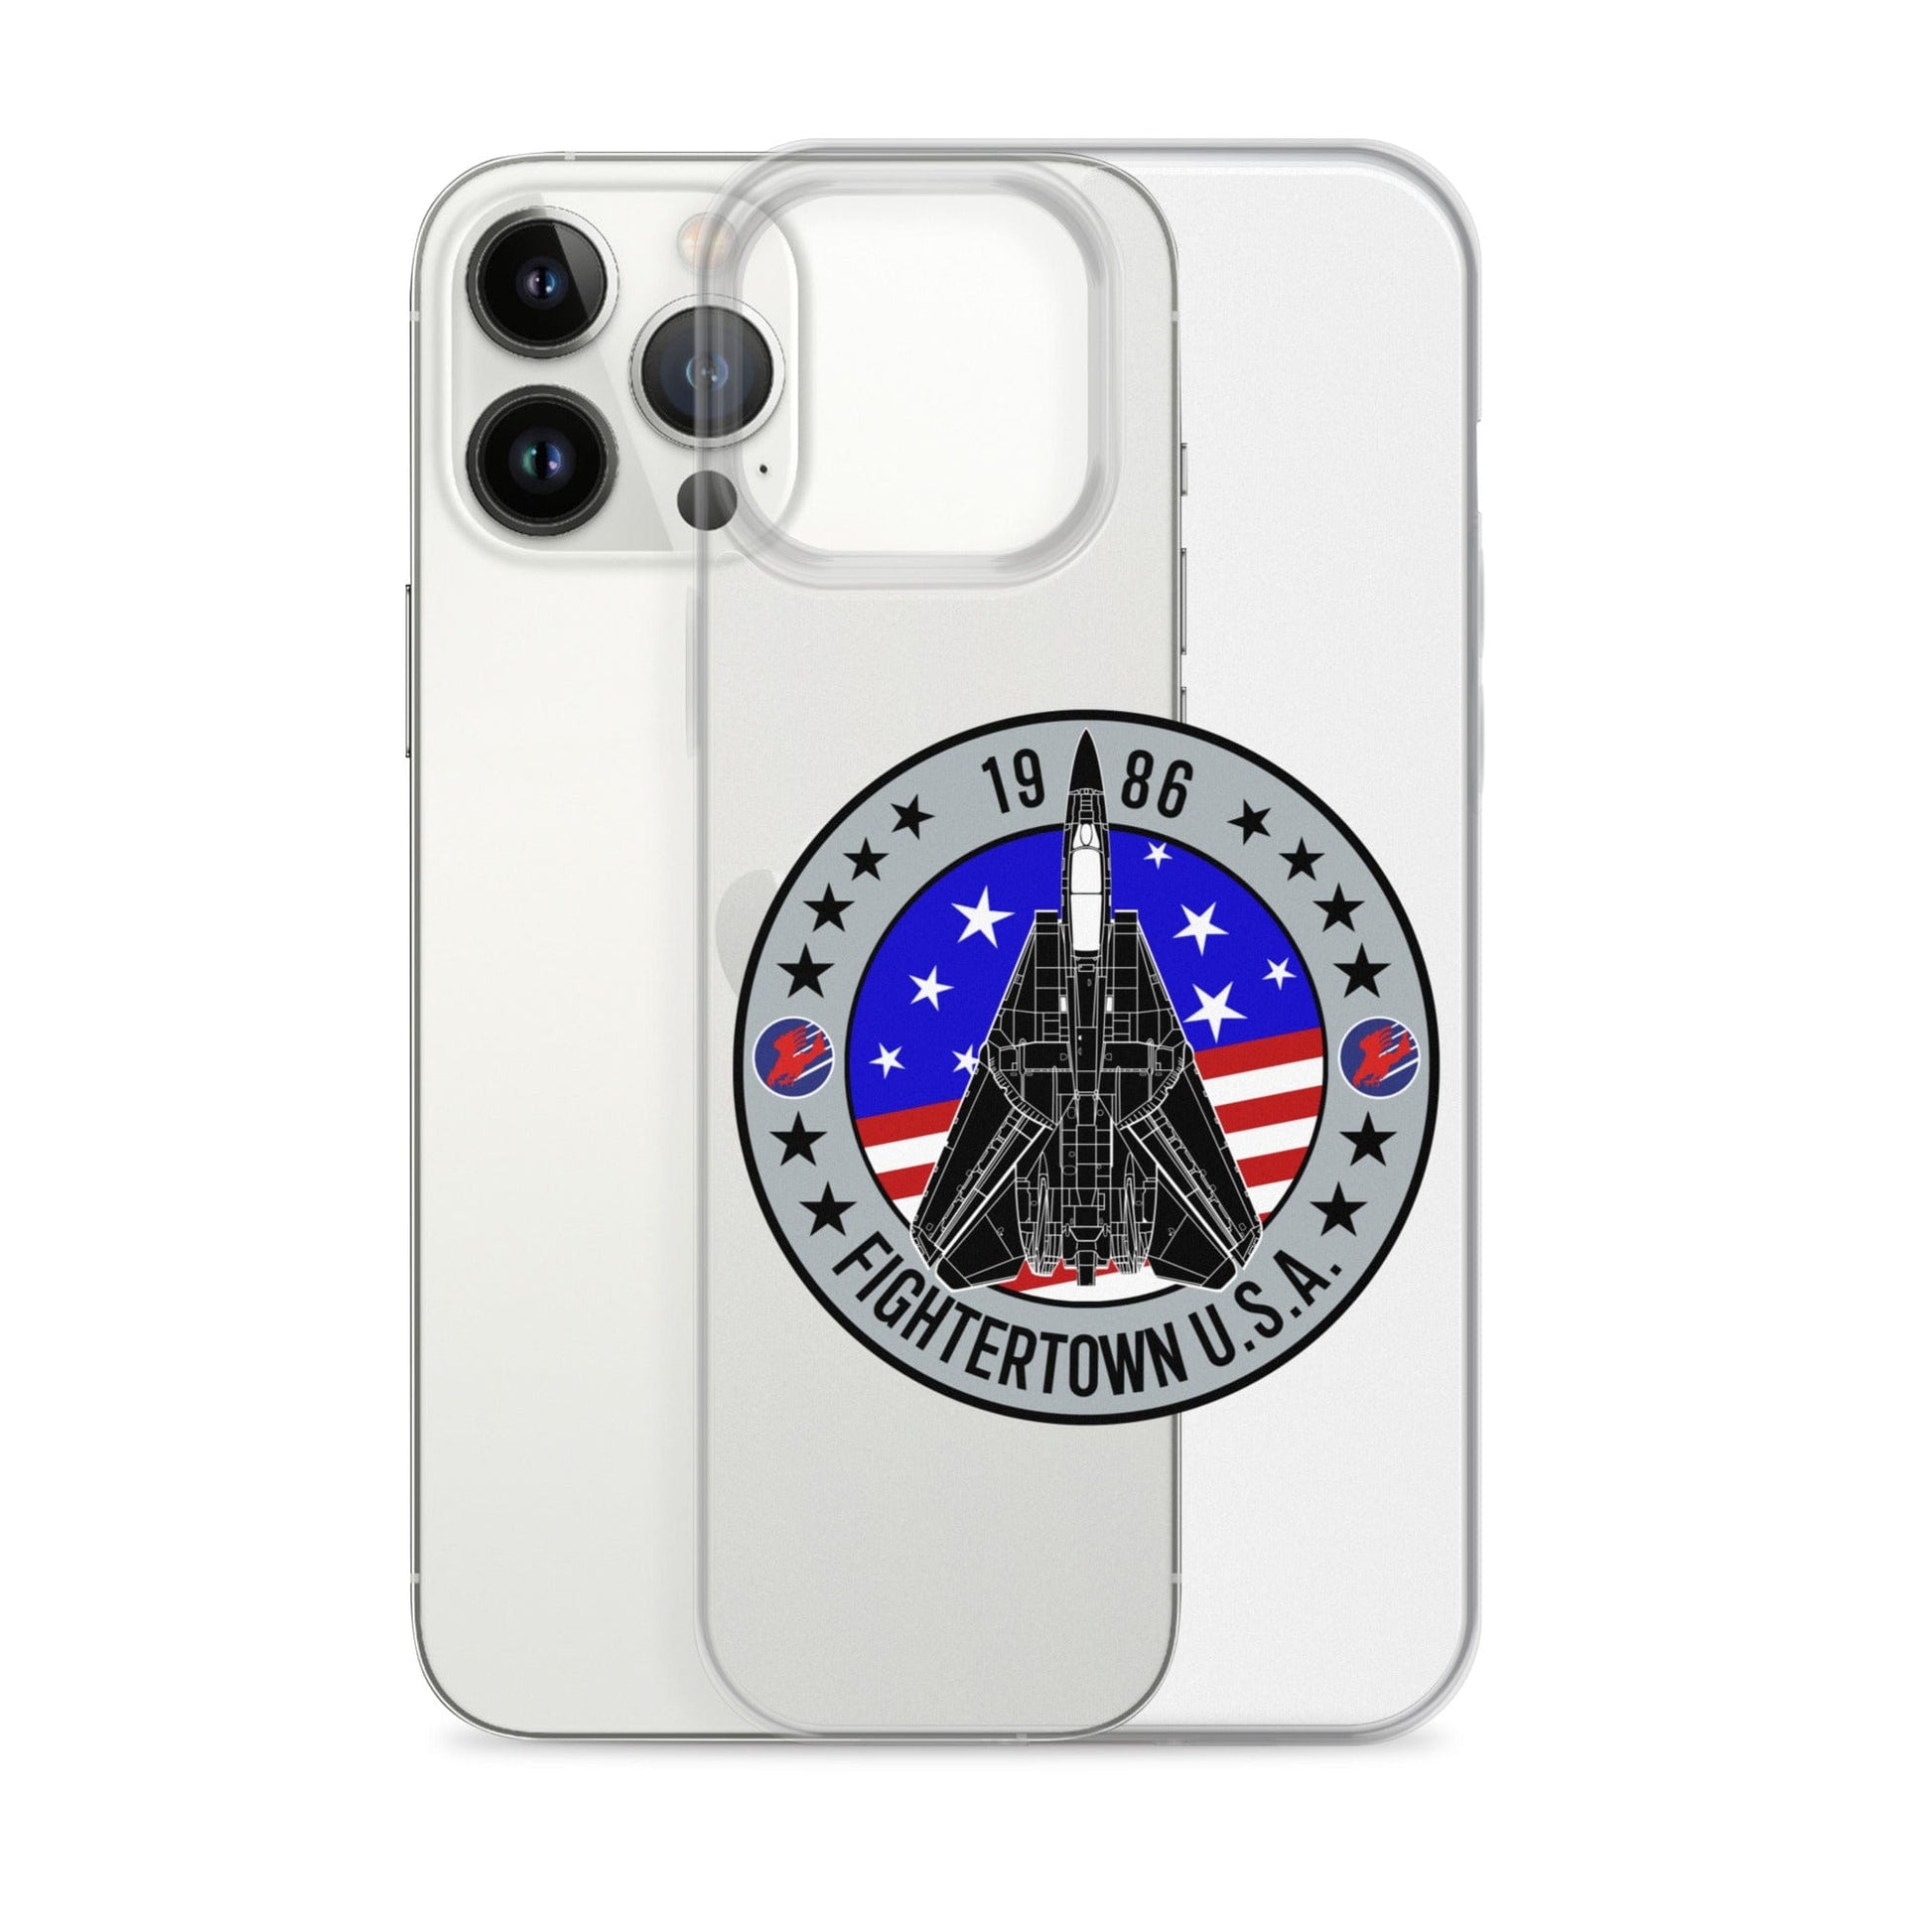 Top Gun Fans Mobile Phone Cases F-14 Tomcat Fightertown Clear iPhone Case